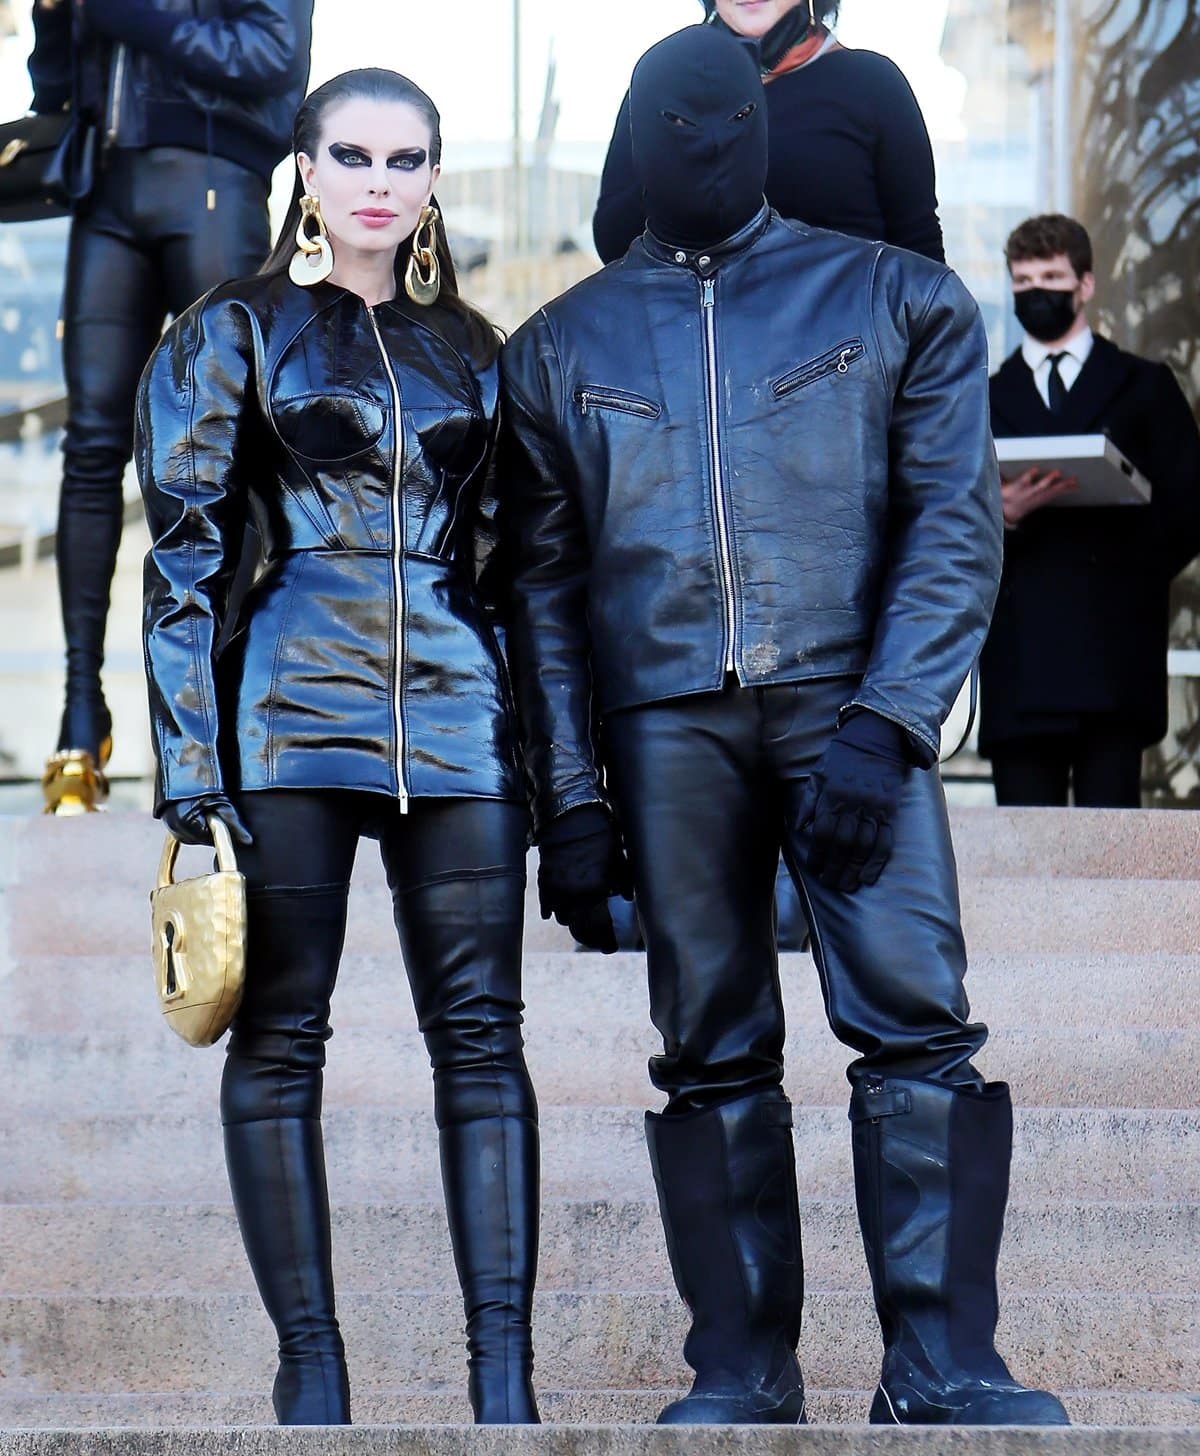 Julia Fox and her boyfriend Kanye West in black leather jackets and dark leather pants